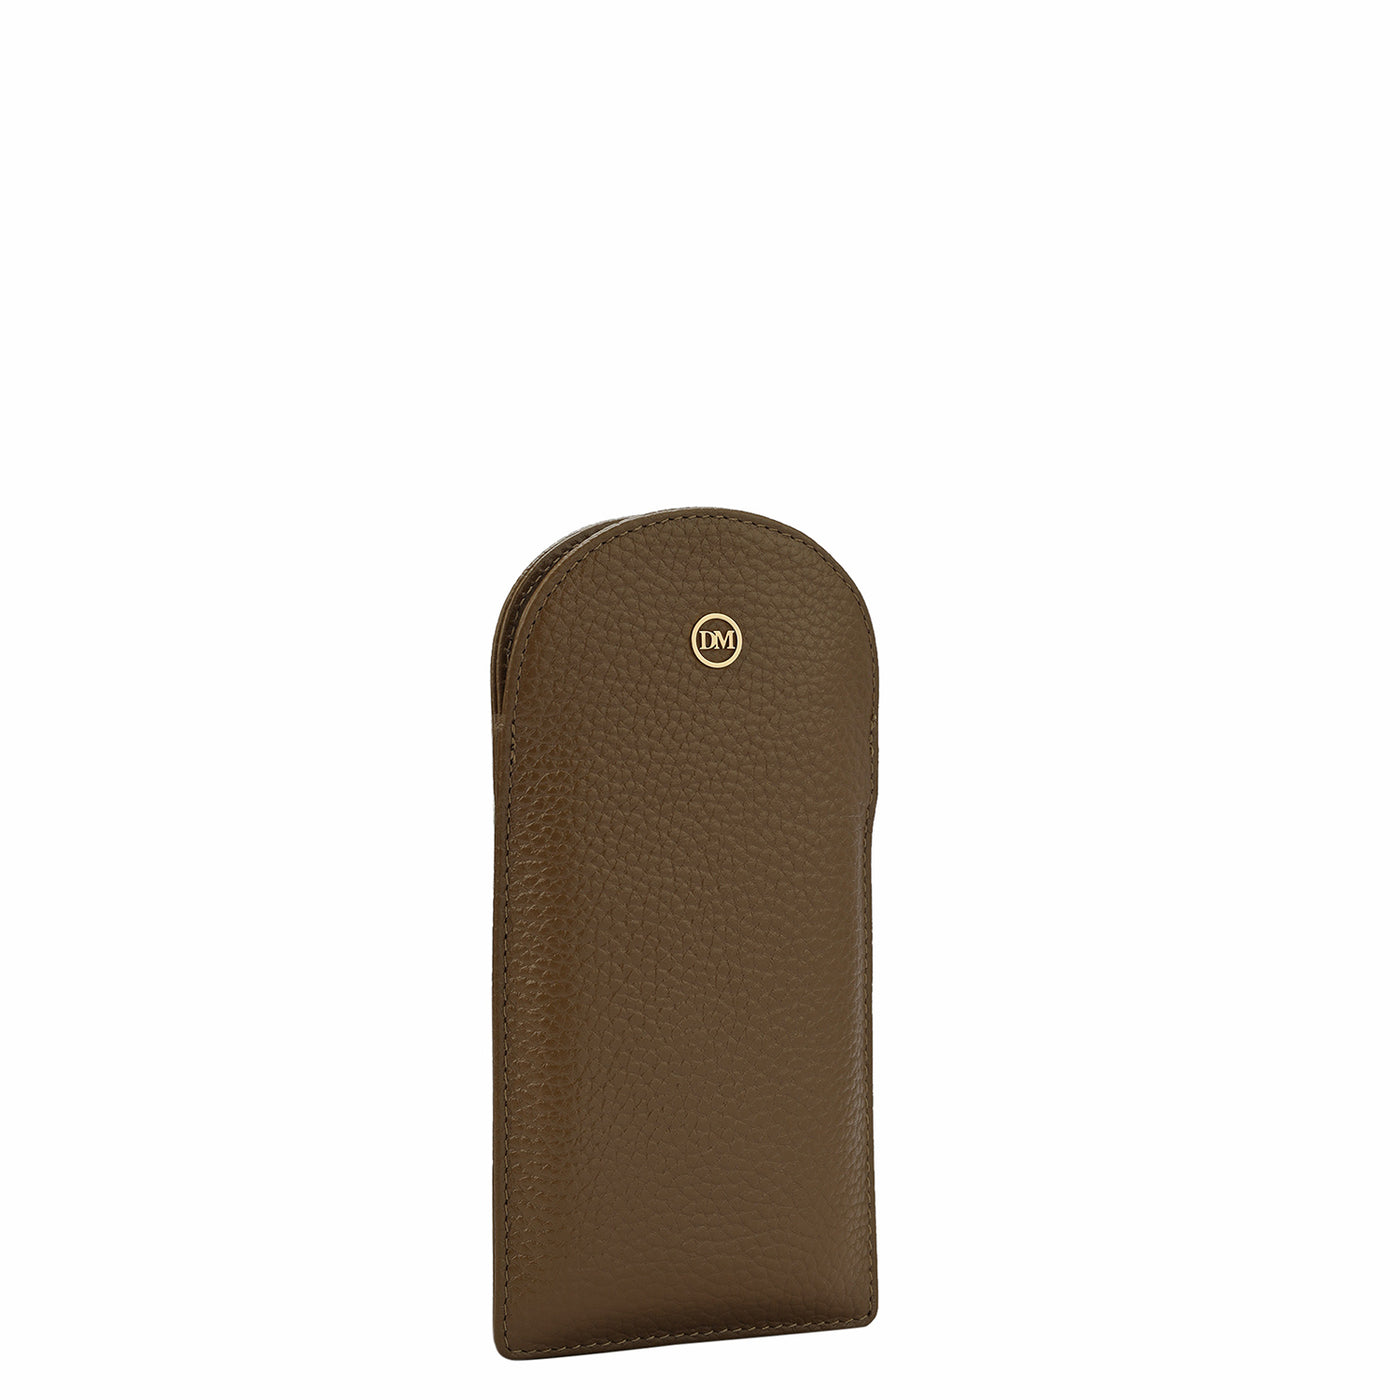 Wax Leather Spectacle Case - Moss